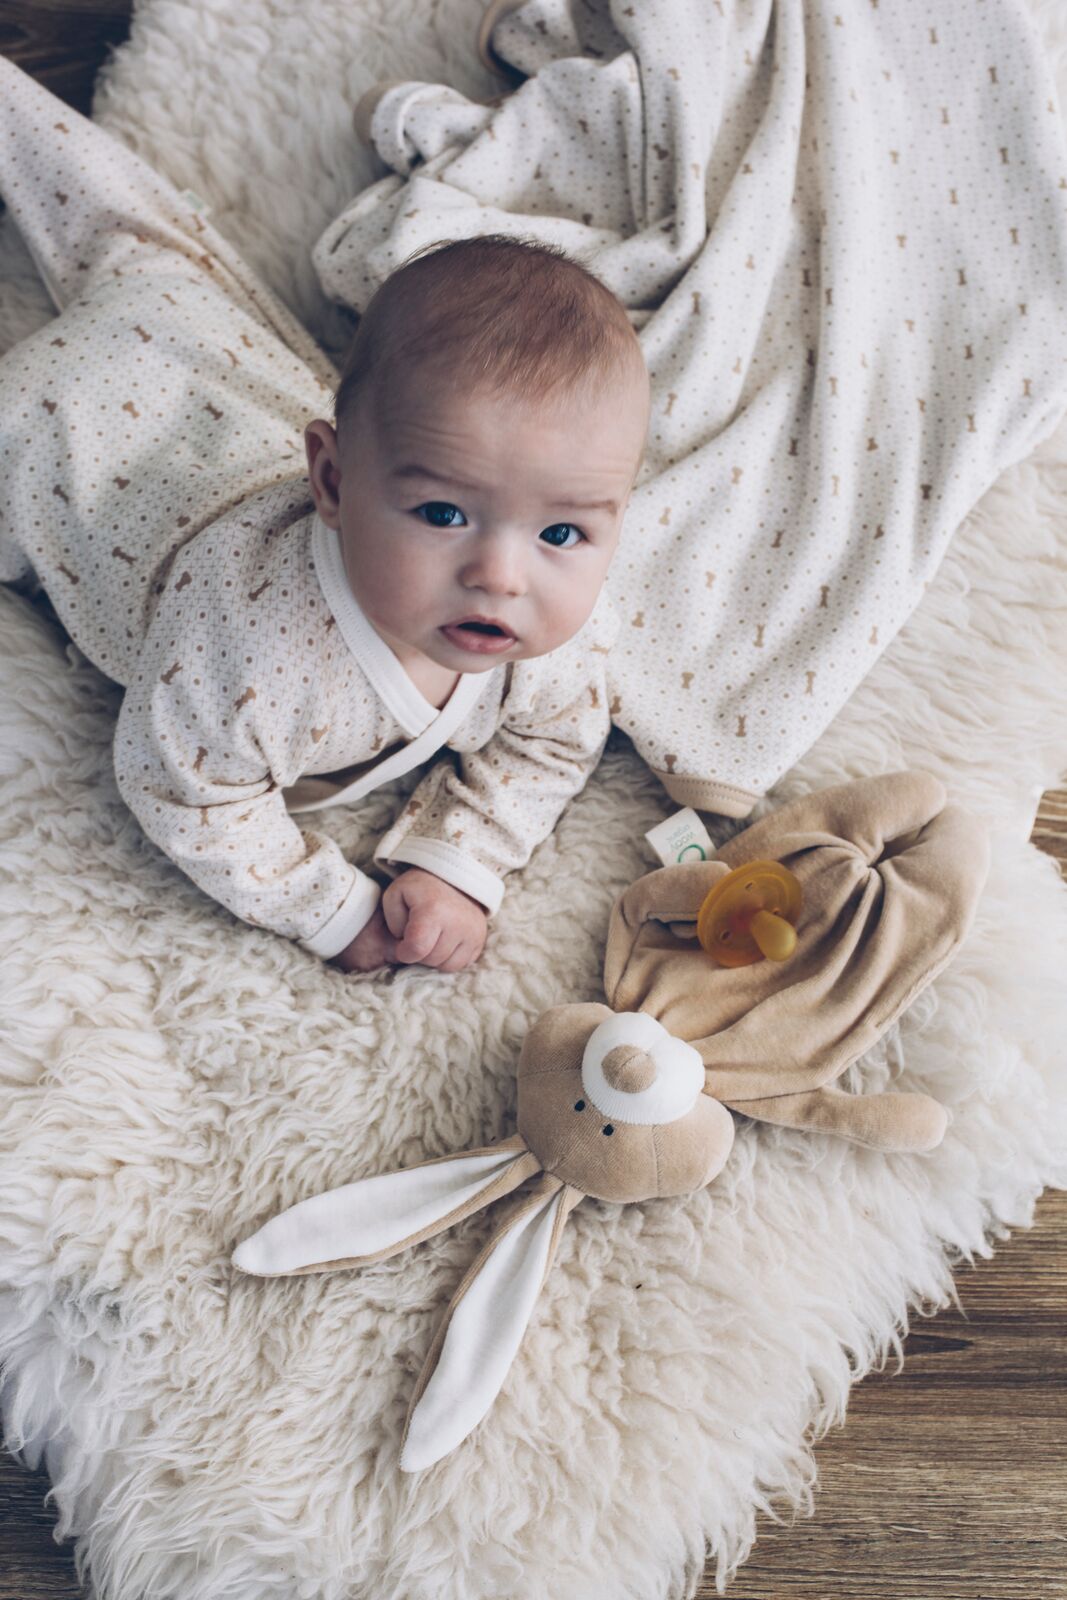 Baby with comforter bunny laying on bed